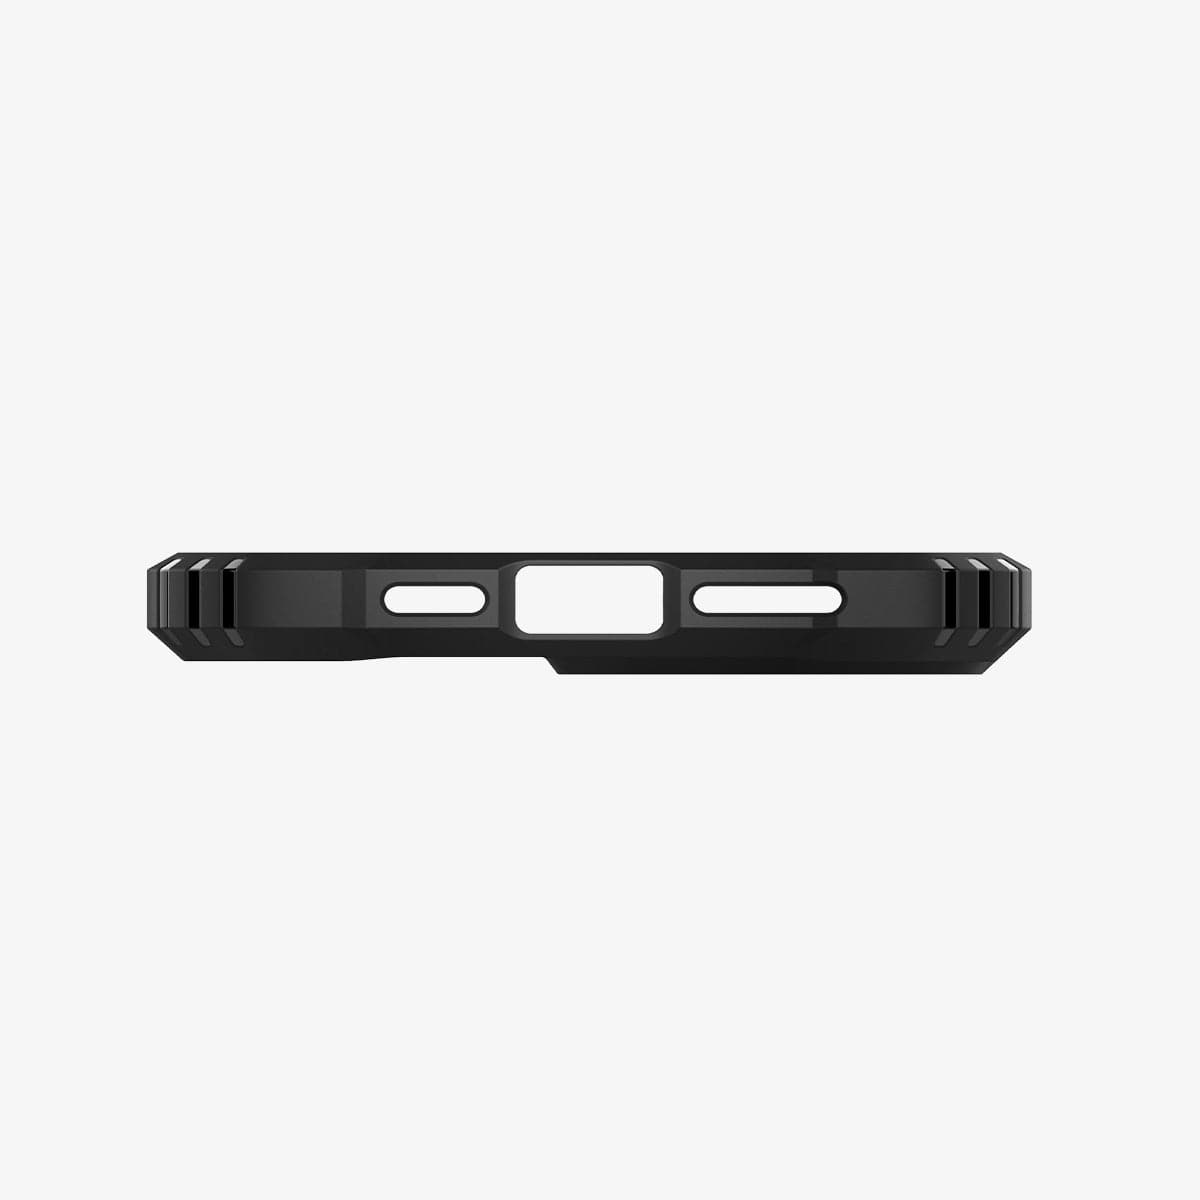 ACS03227 - iPhone 13 Pro Max Case Nitro Force in matte black showing the bottom with precise cutouts